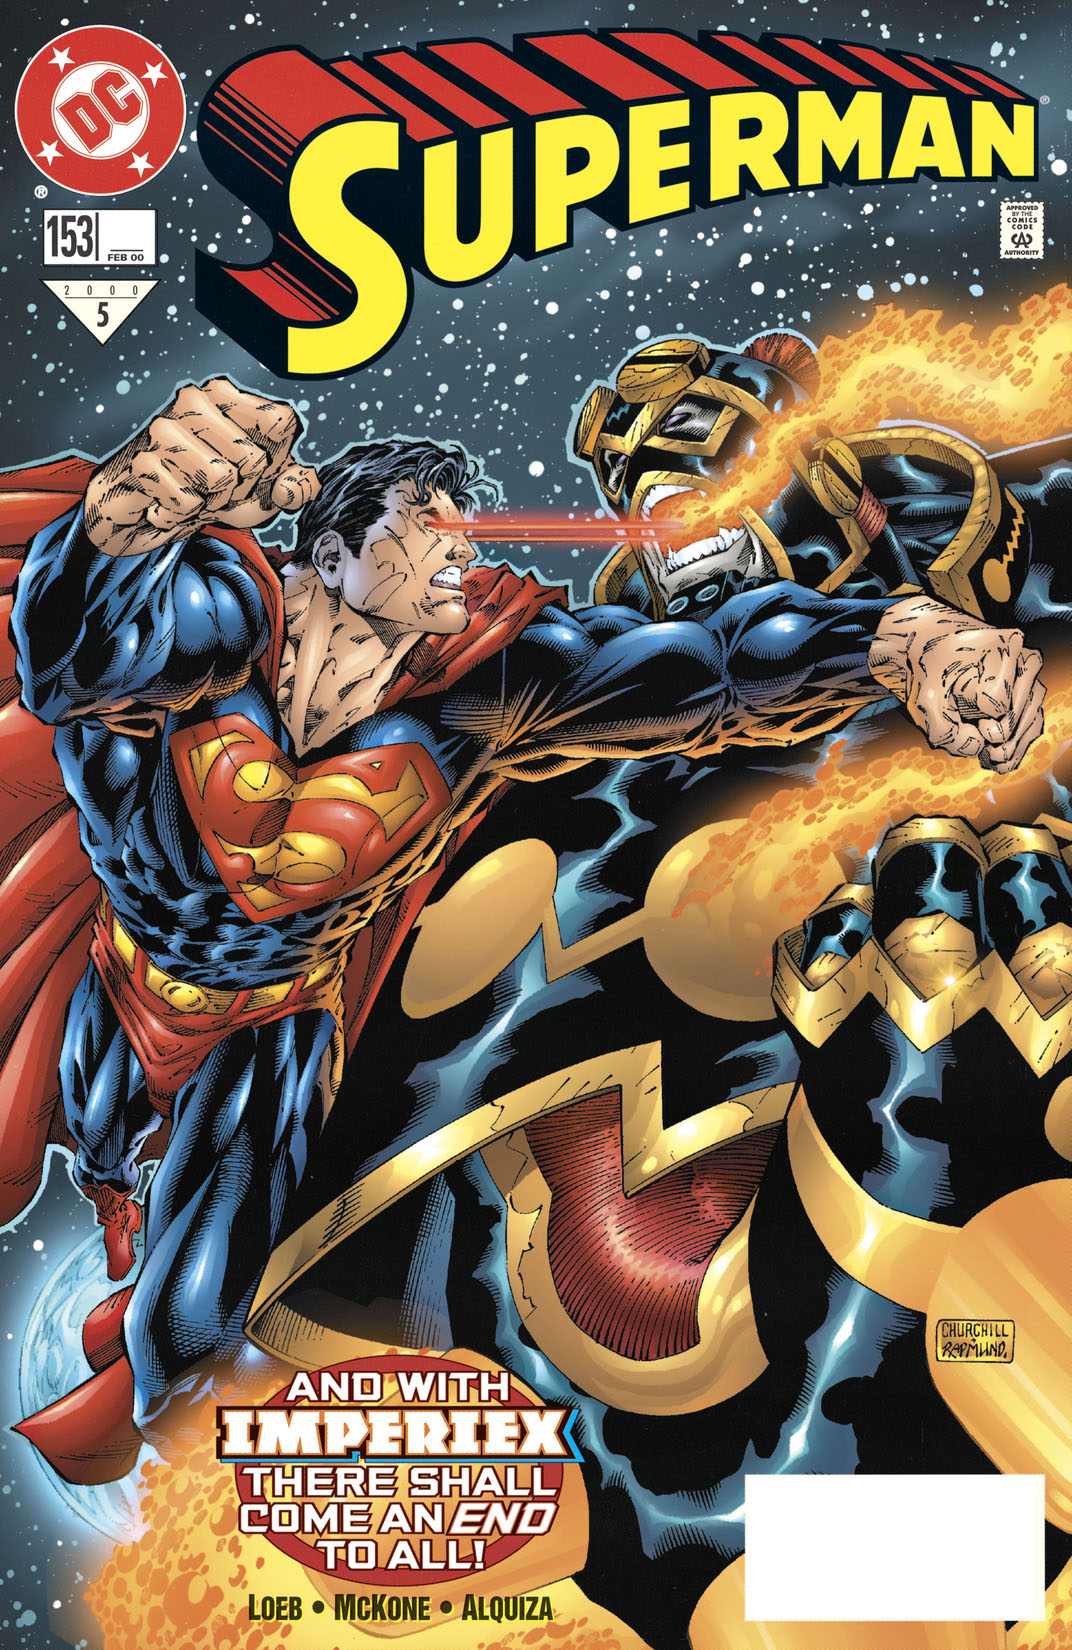 Superman (1986-2006) #153 preview images